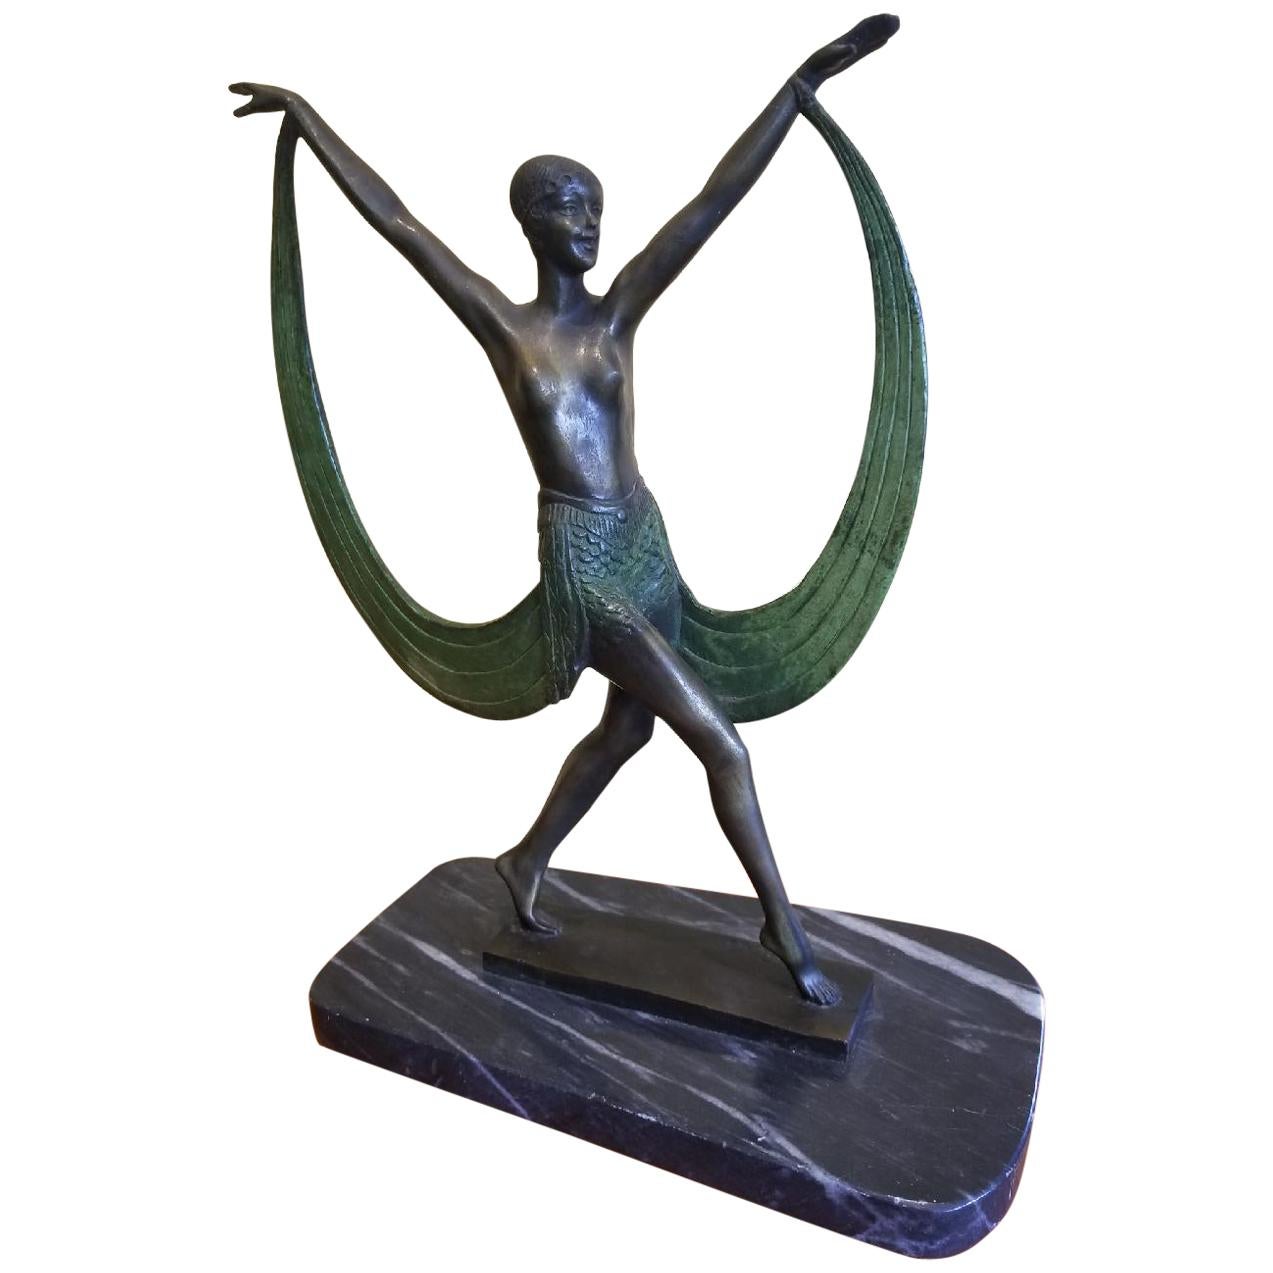 Art Deco Bronze Sculpture "Lysis" by French Artist  "Fayral" ‘Pierre Le Faguays’